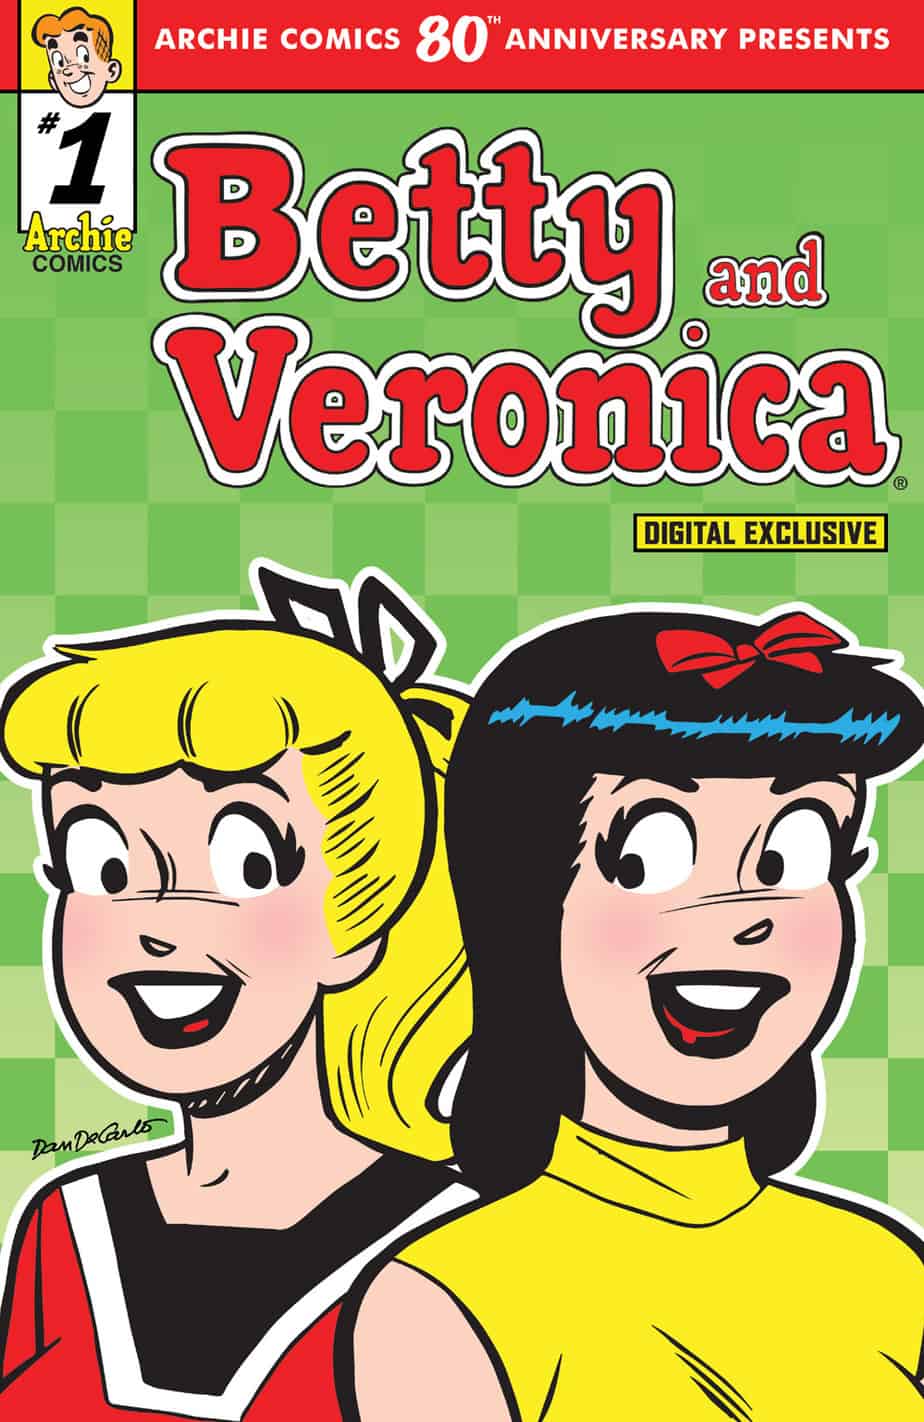 Preview Archie Comics 80th Anniversary Presents